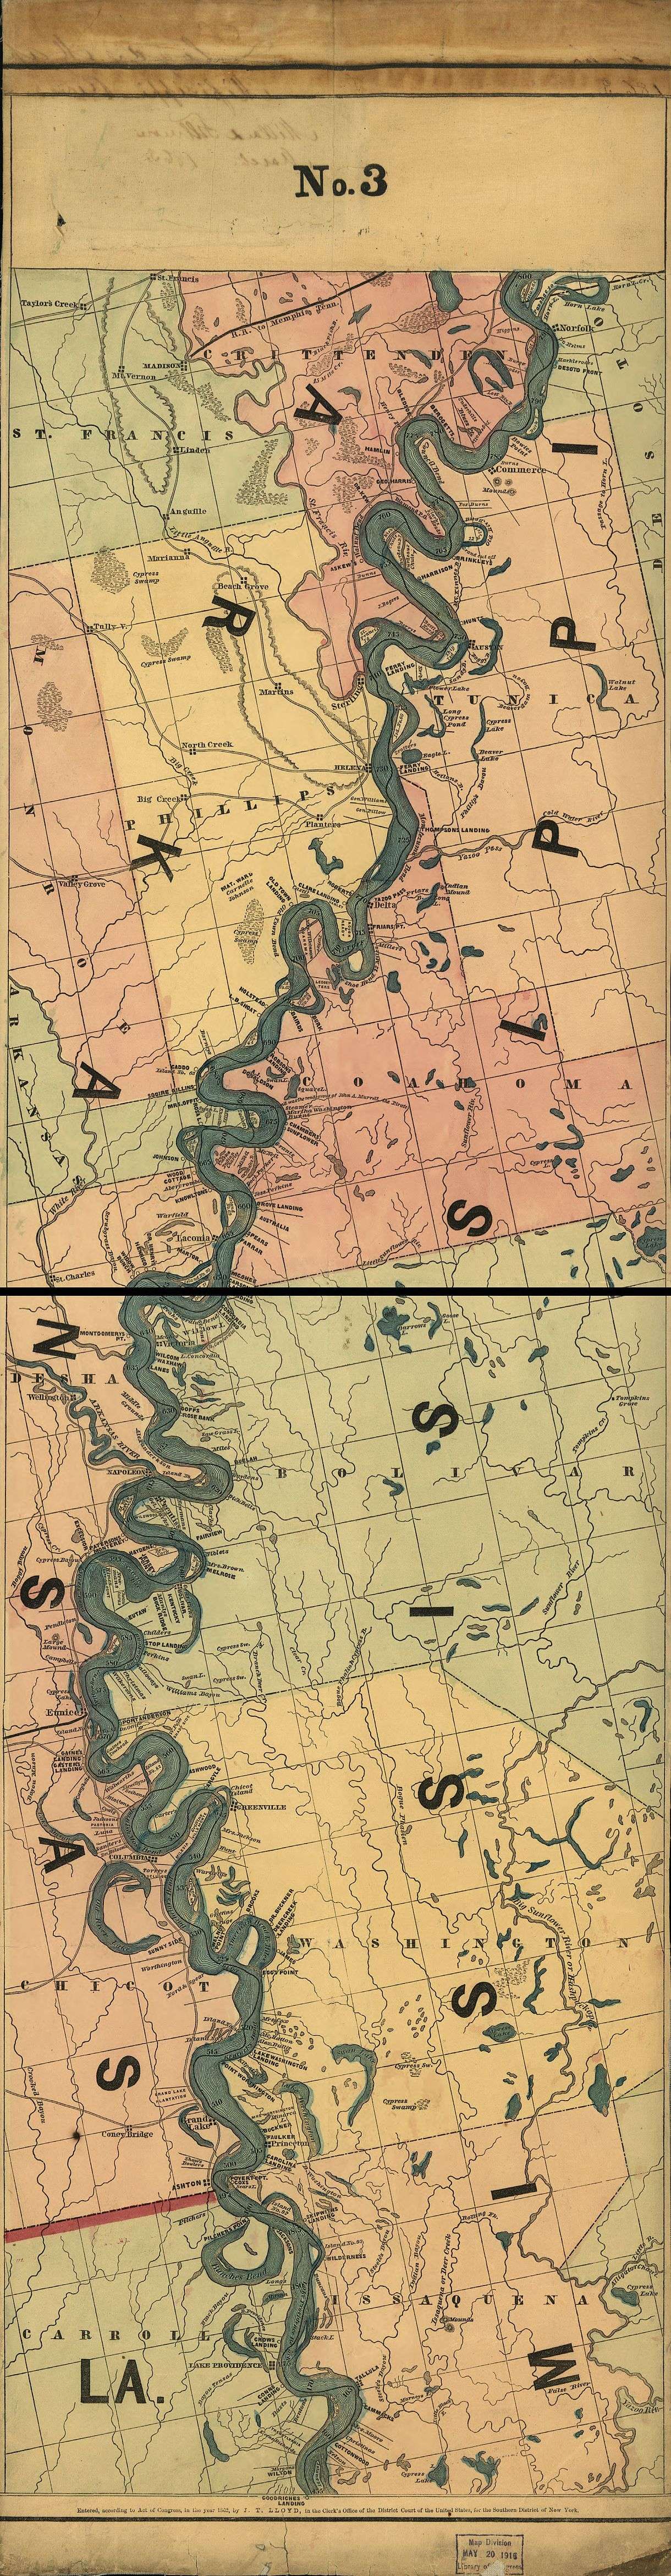 An 1862 map shows the location of Eutaw